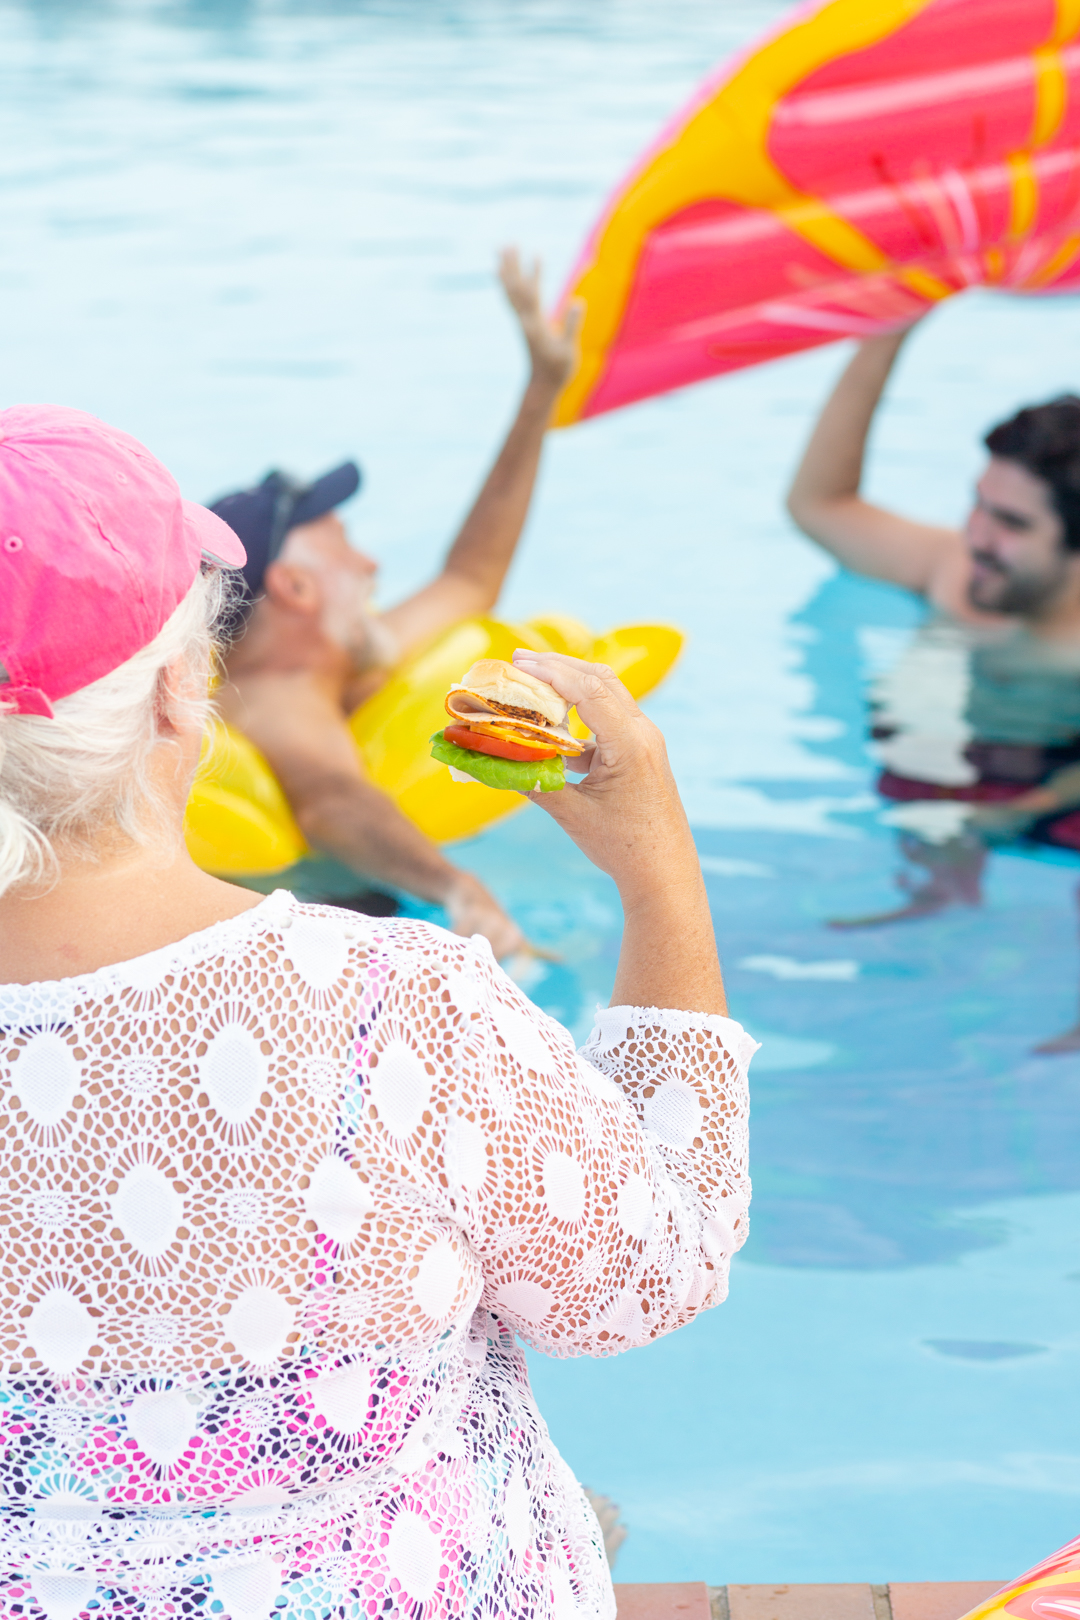 woman enjoying a slider sandwich while sitting with feet in the pool. Family playing with pool floats in the background.